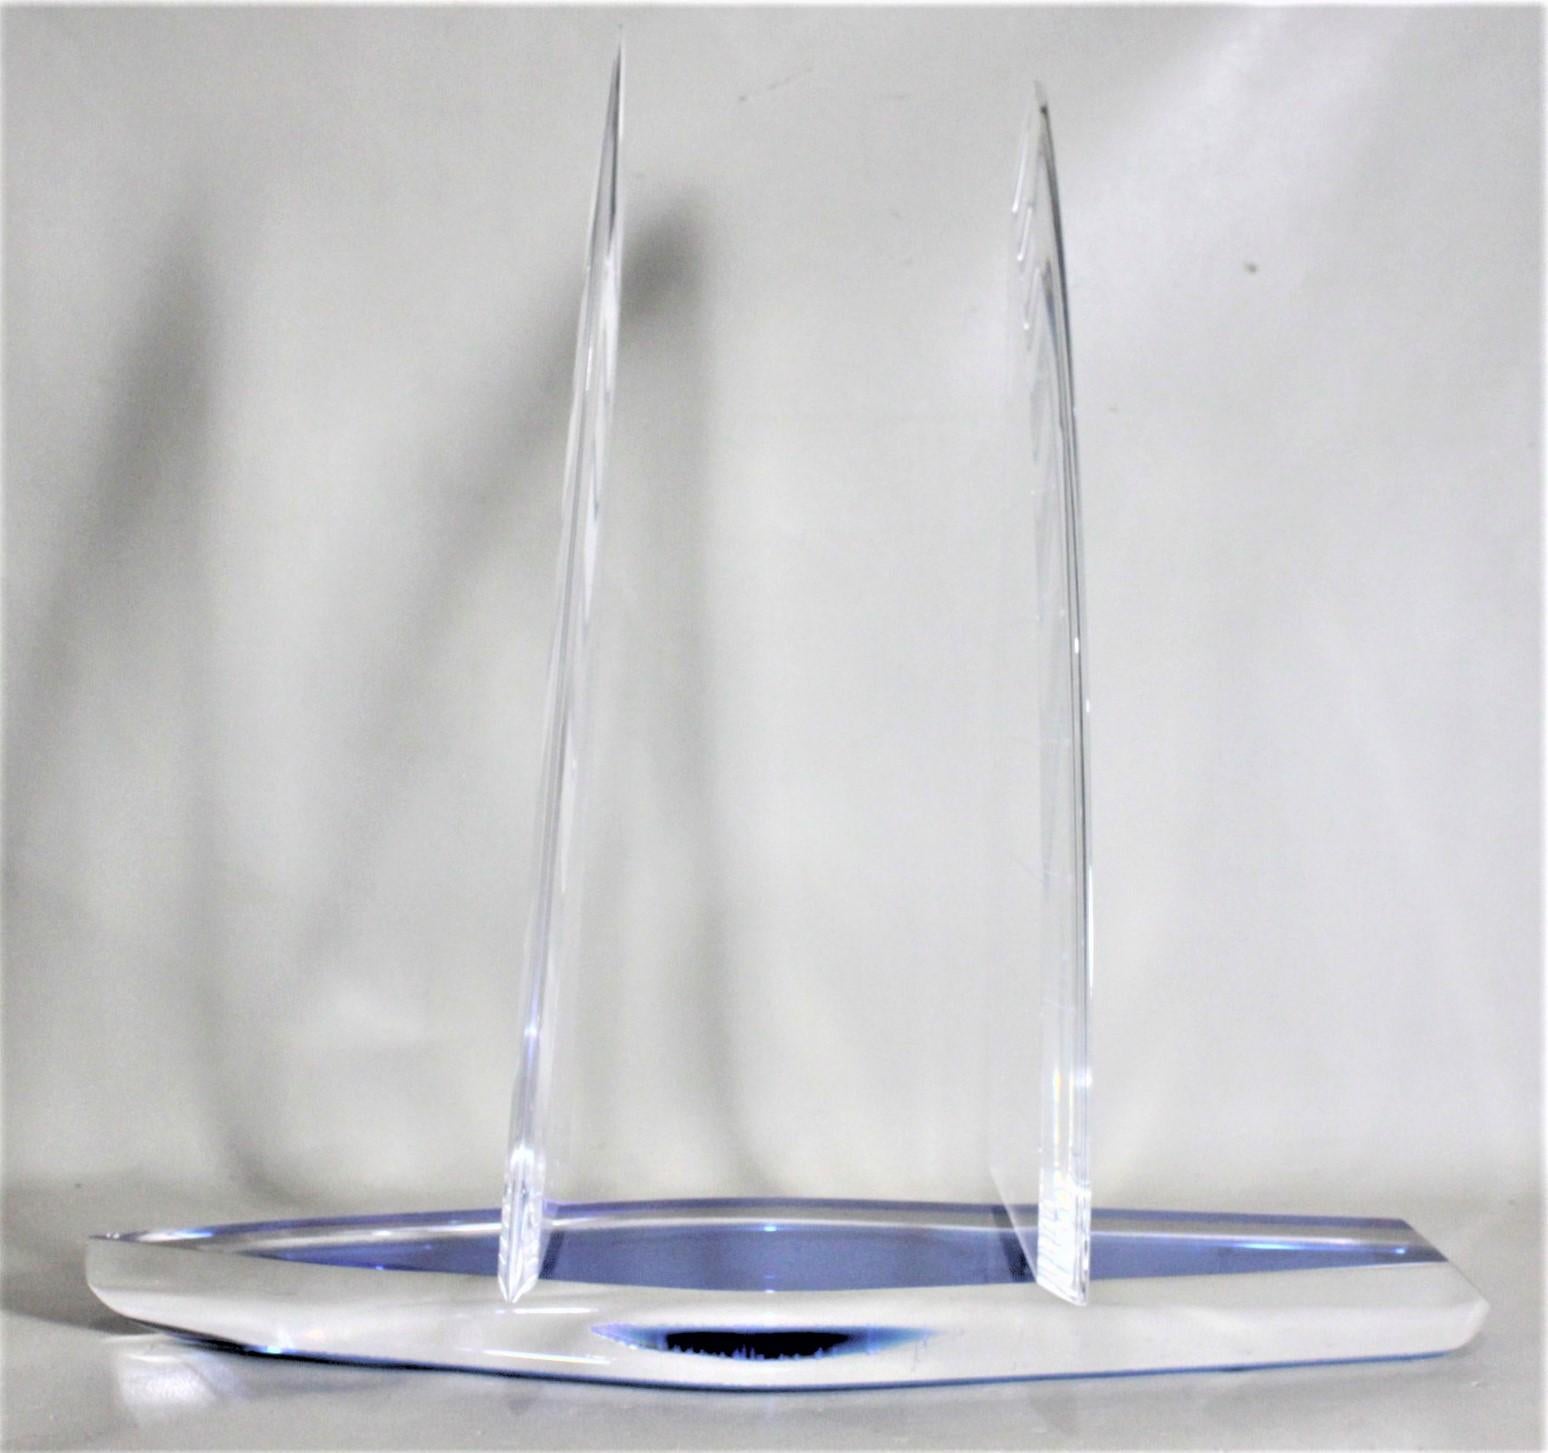 Vintage Blue & Clear Lucite Racing Sailboat Sculpture by Wintrade, Beverly Hills In Good Condition For Sale In Hamilton, Ontario